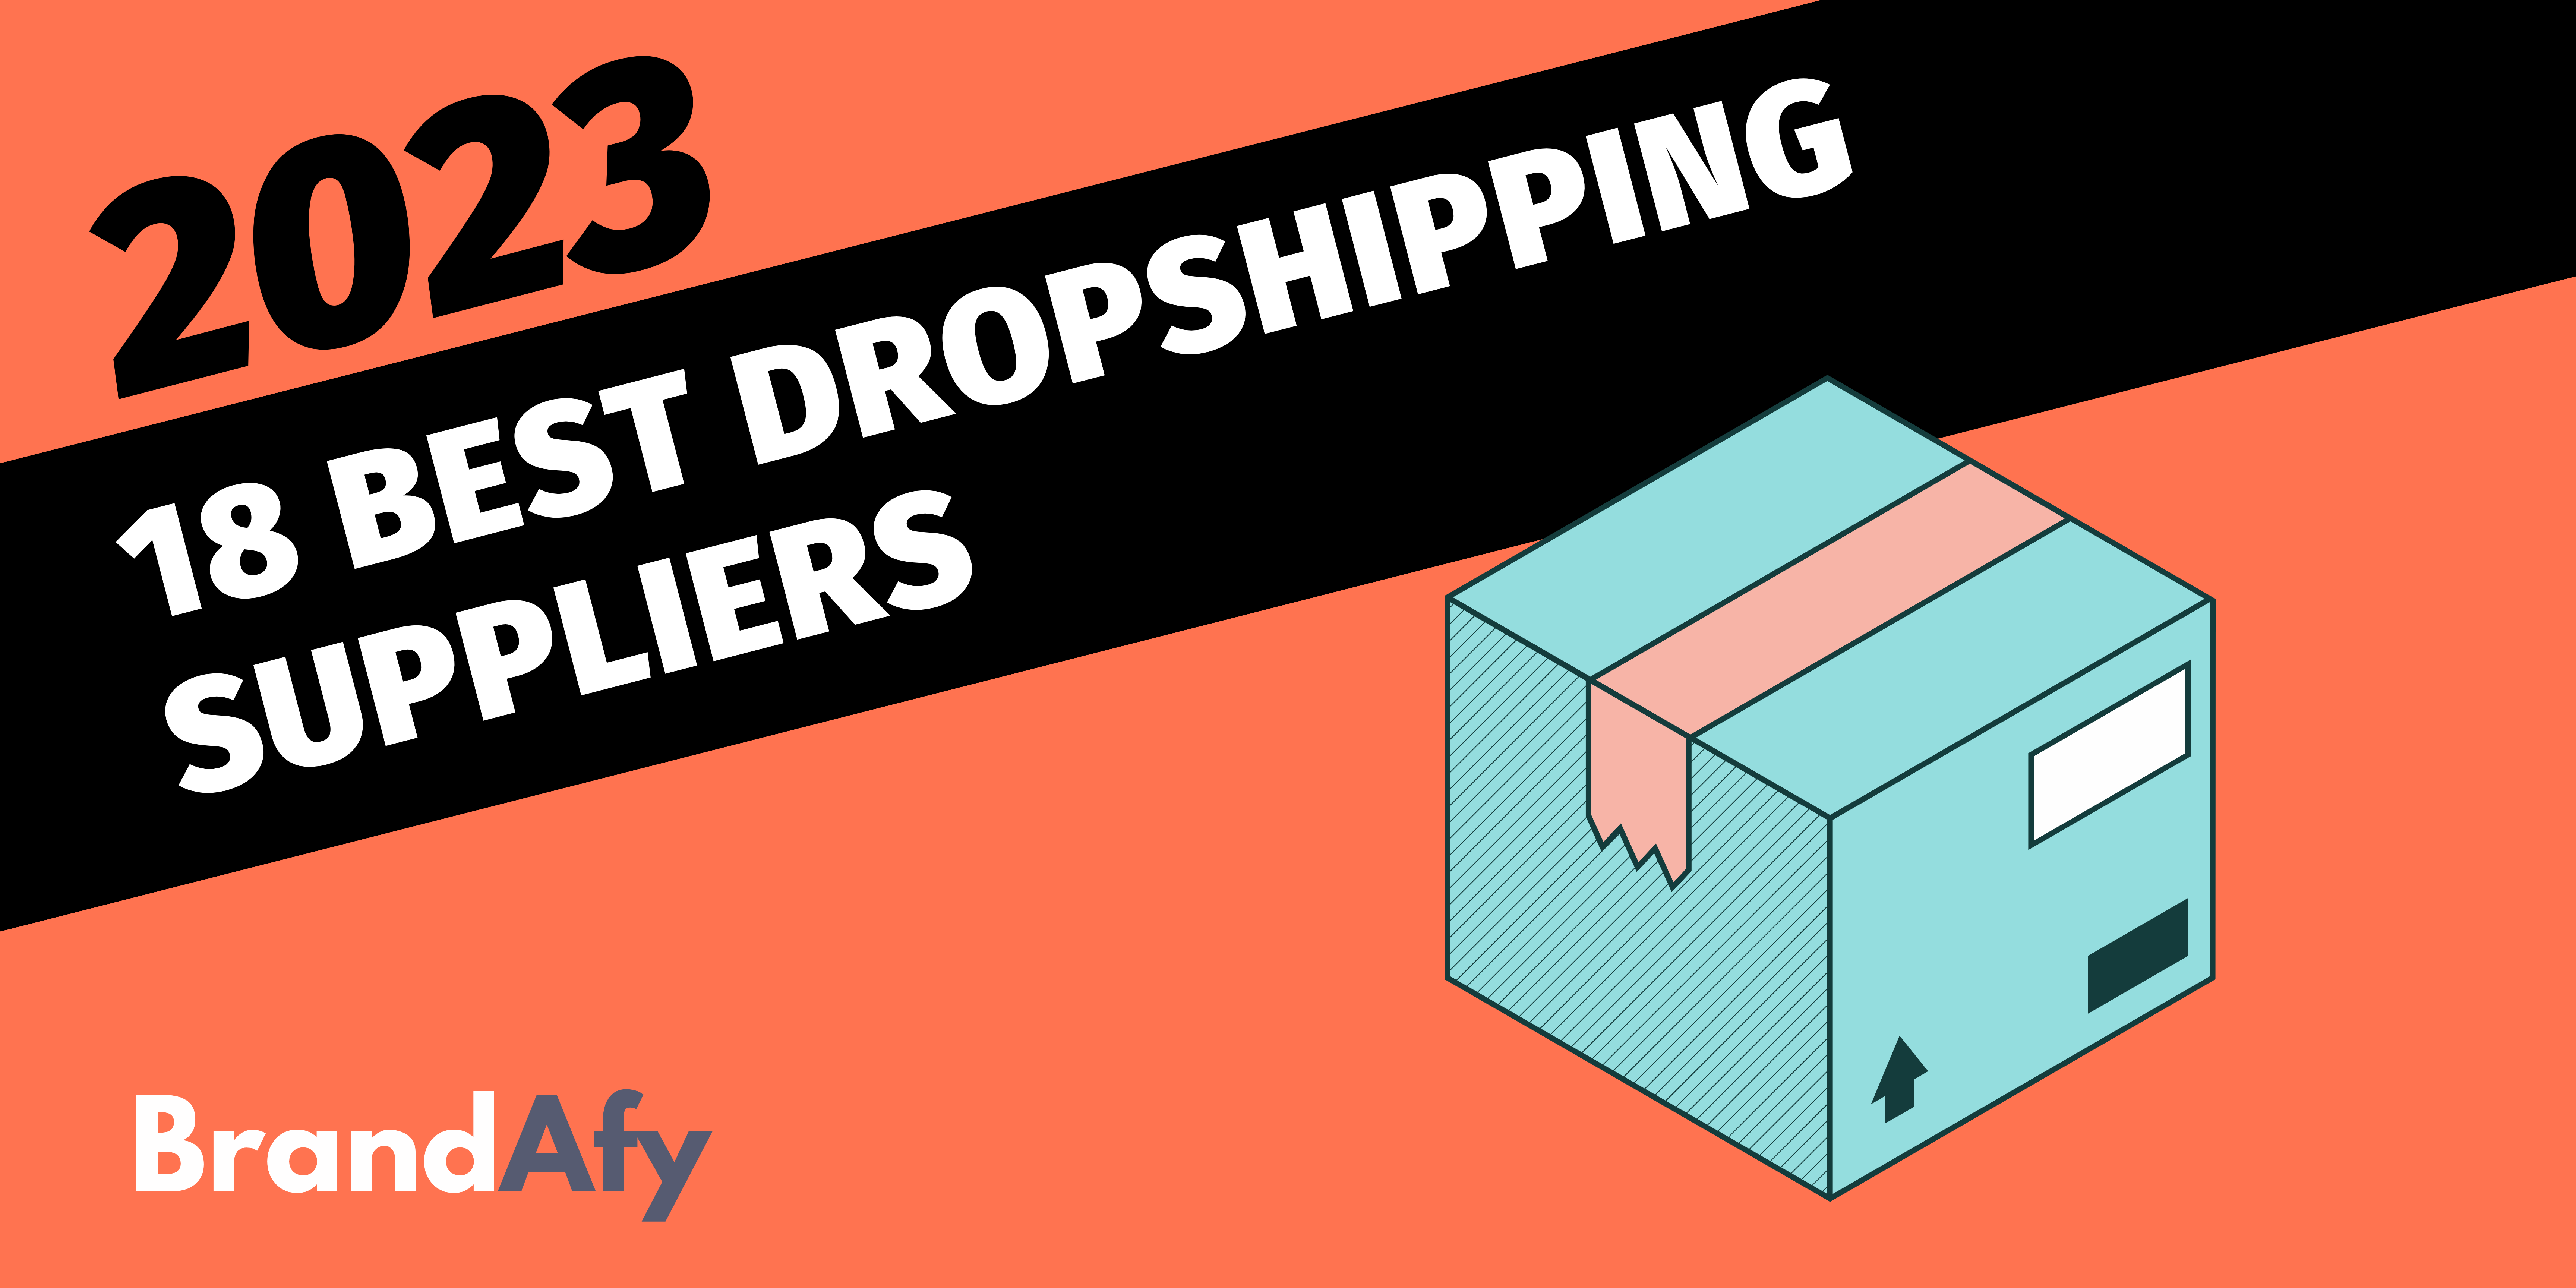 Dropified - The Ultimate Shopify App For Dropshipping